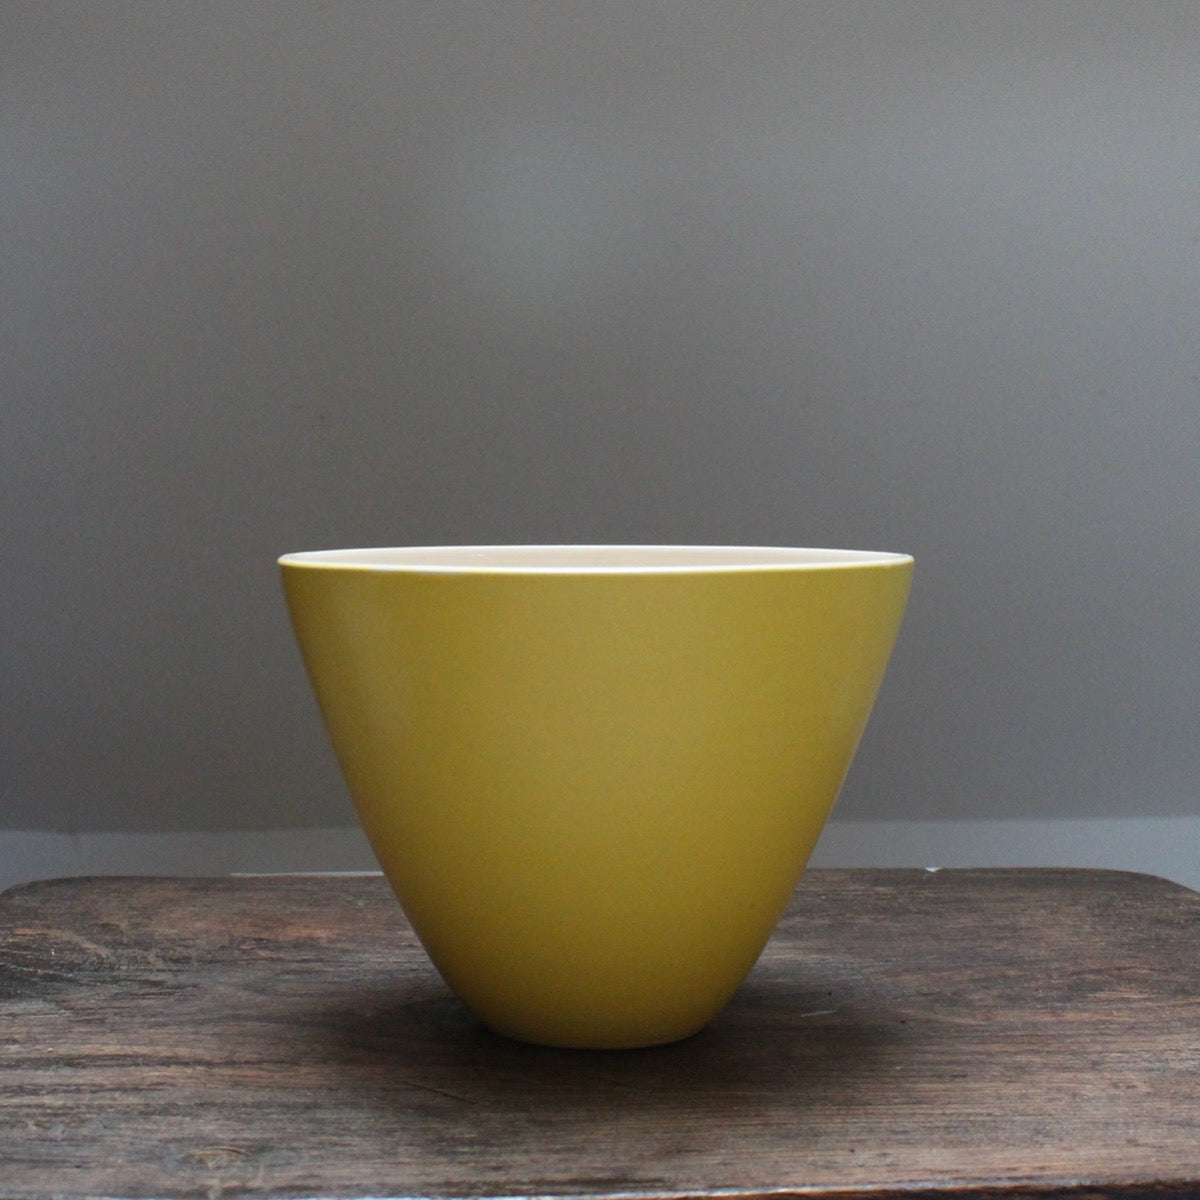 A yellow bowl Lucy Burley on a wooden table